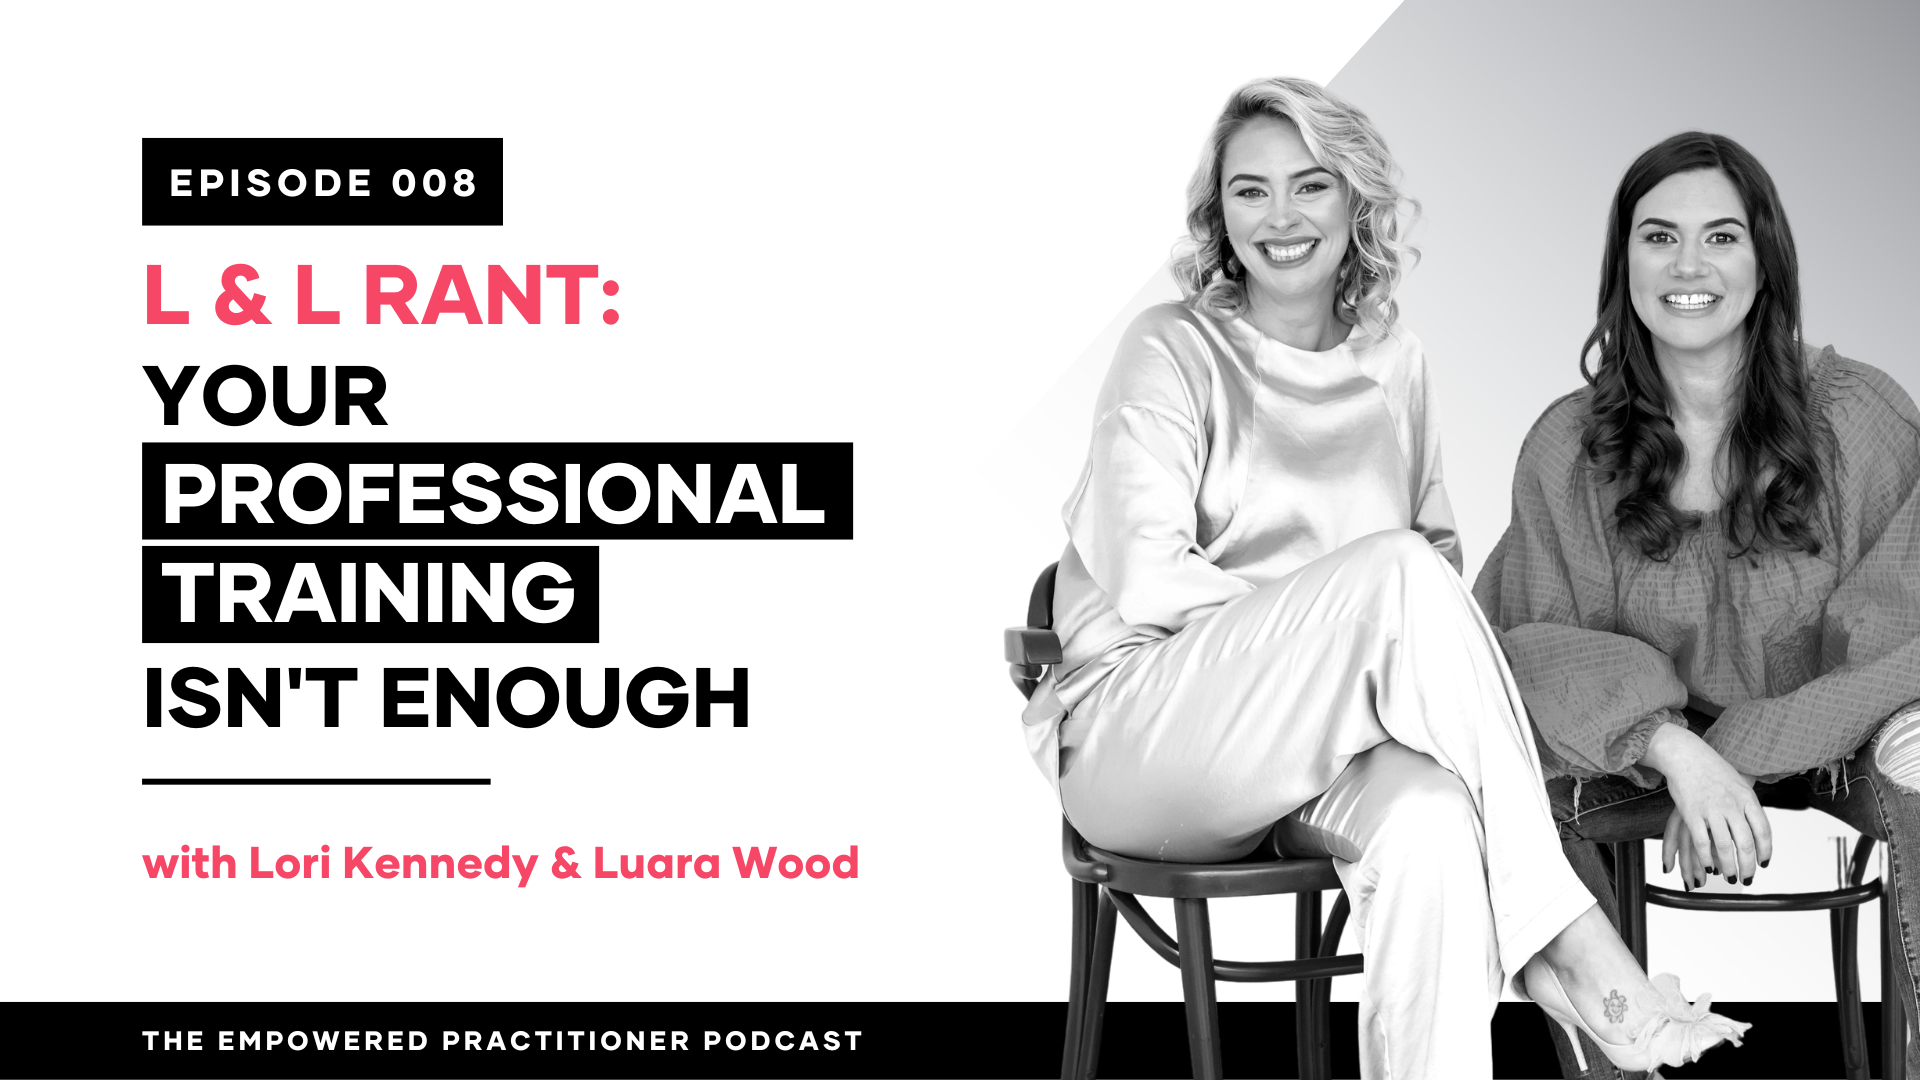 Your Professional Training Isn't Enough with Laura Wood